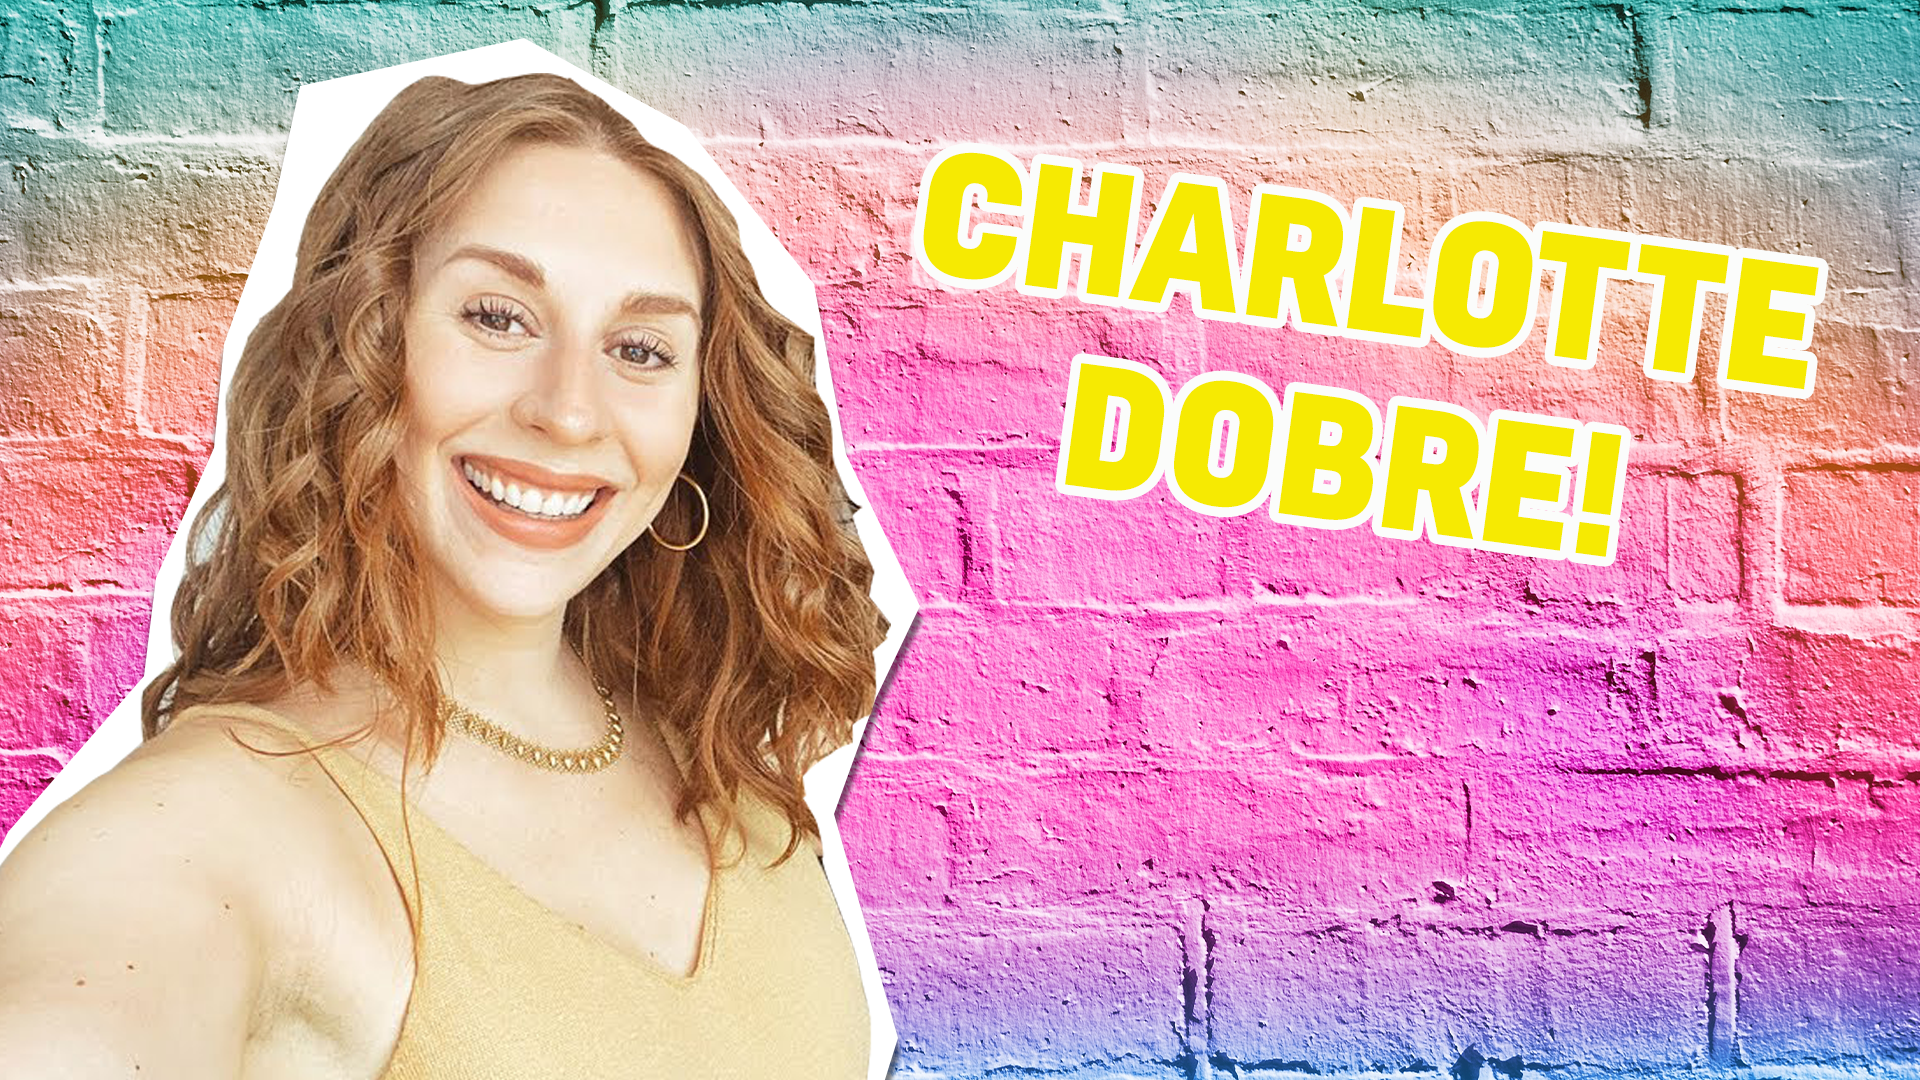 Charlotte Dobre is the master of reactions, and this hilarious video is perfect if you're looking for GRWM videos gone wrong!